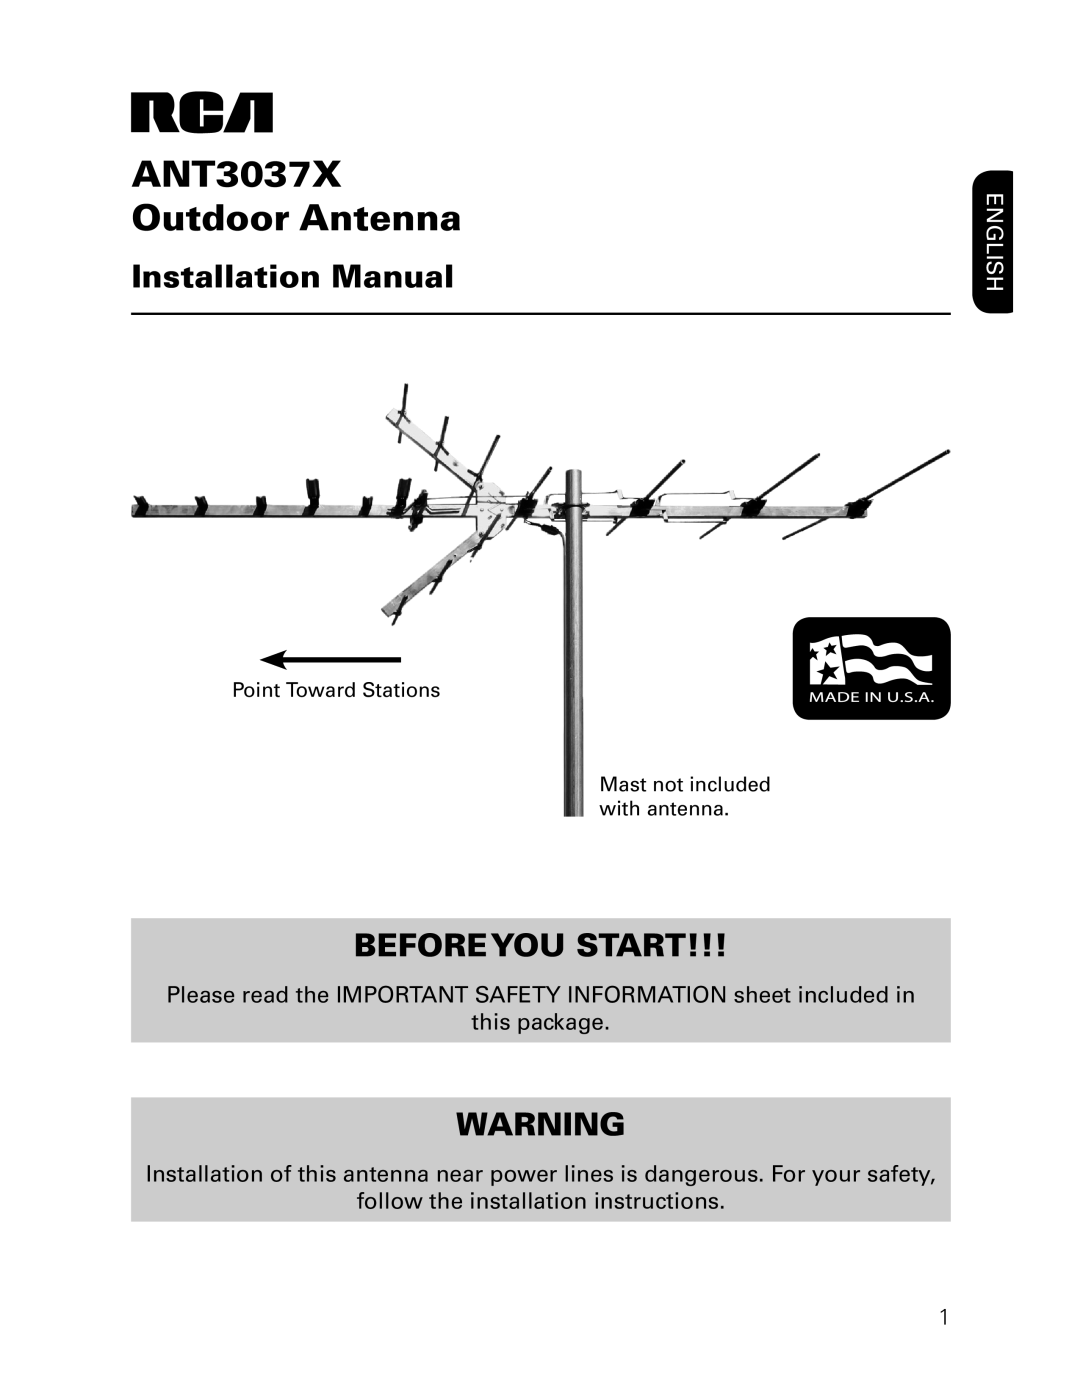 RCA installation manual Installation Manual, Before You Start, English, ANT3037X Outdoor Antenna 